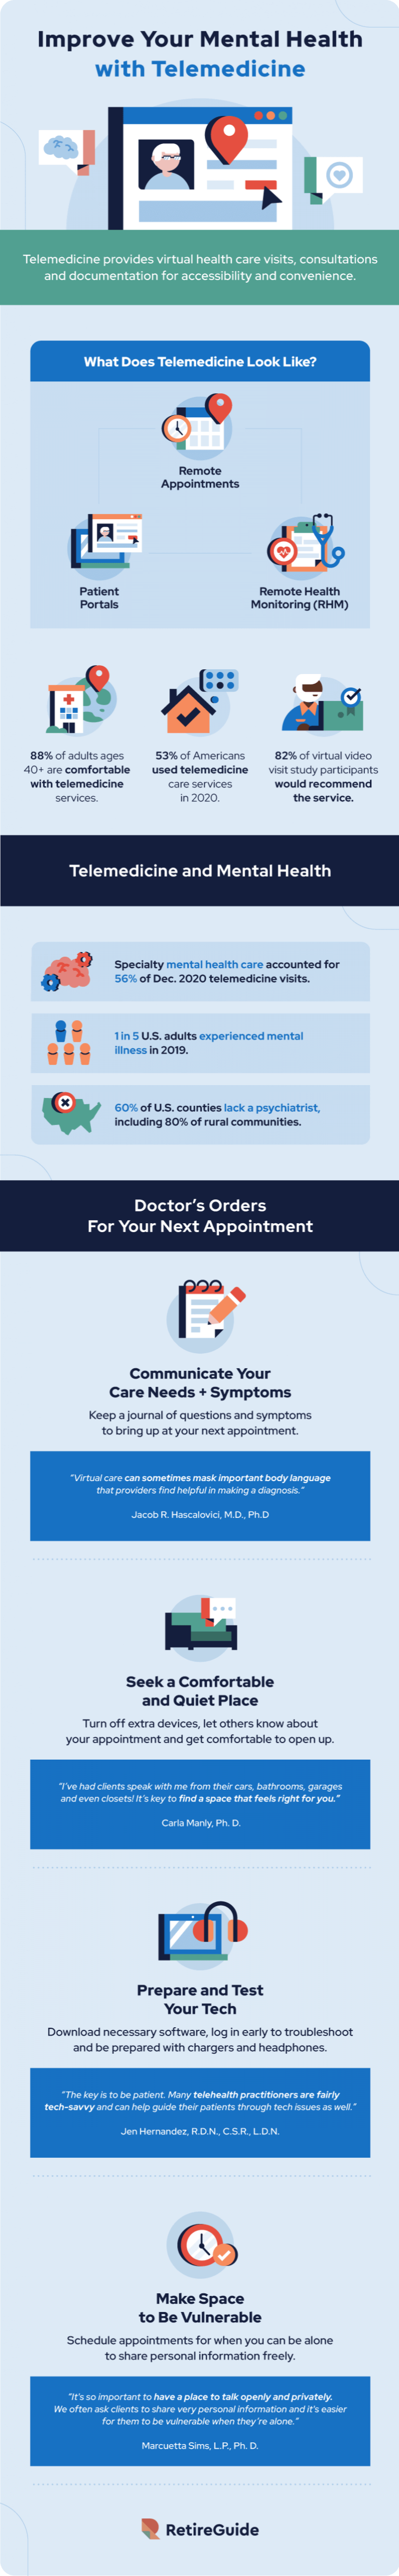 Improve your mental health with telemedicine infographic